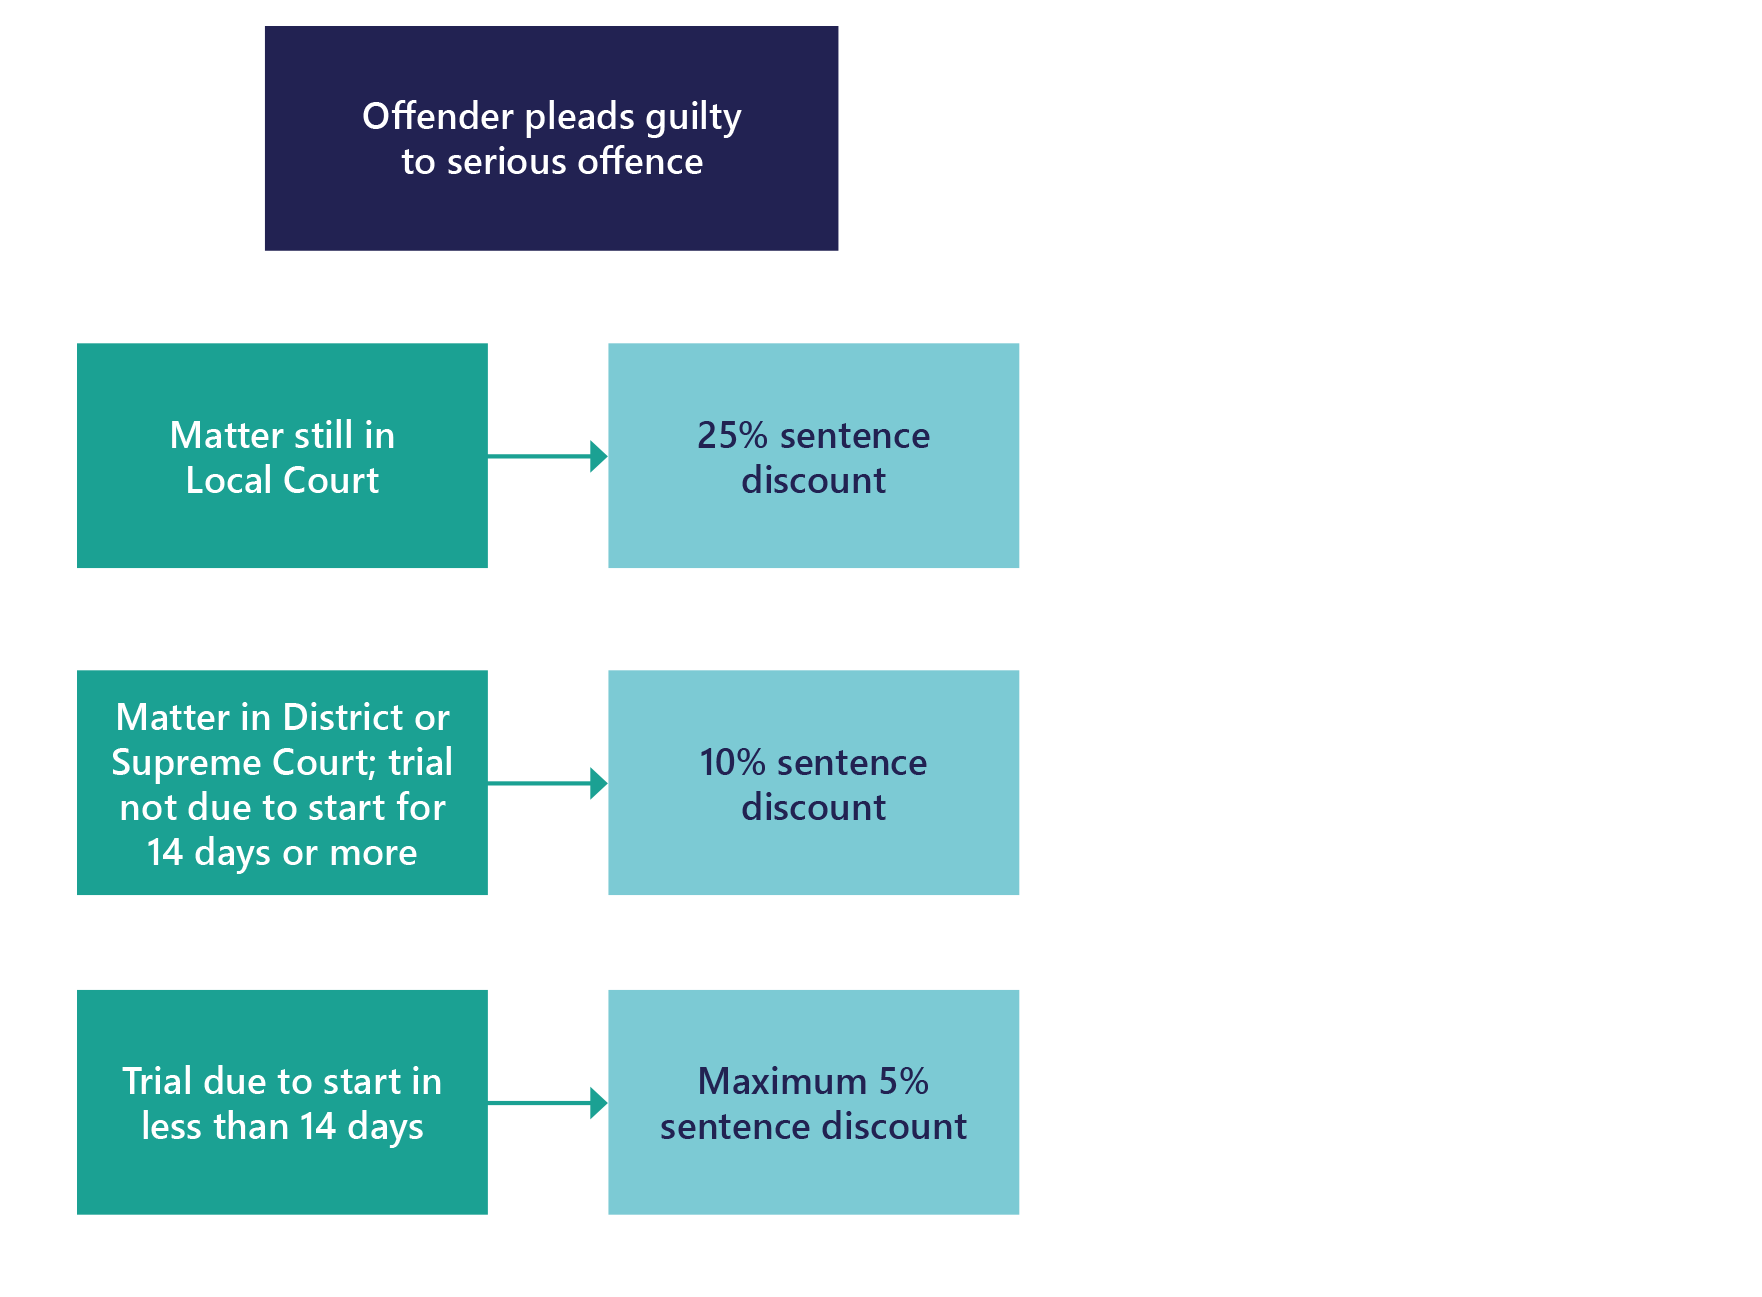 Sentence discounts given for early guilty pleas (for charges laid on or after April 30 2018)